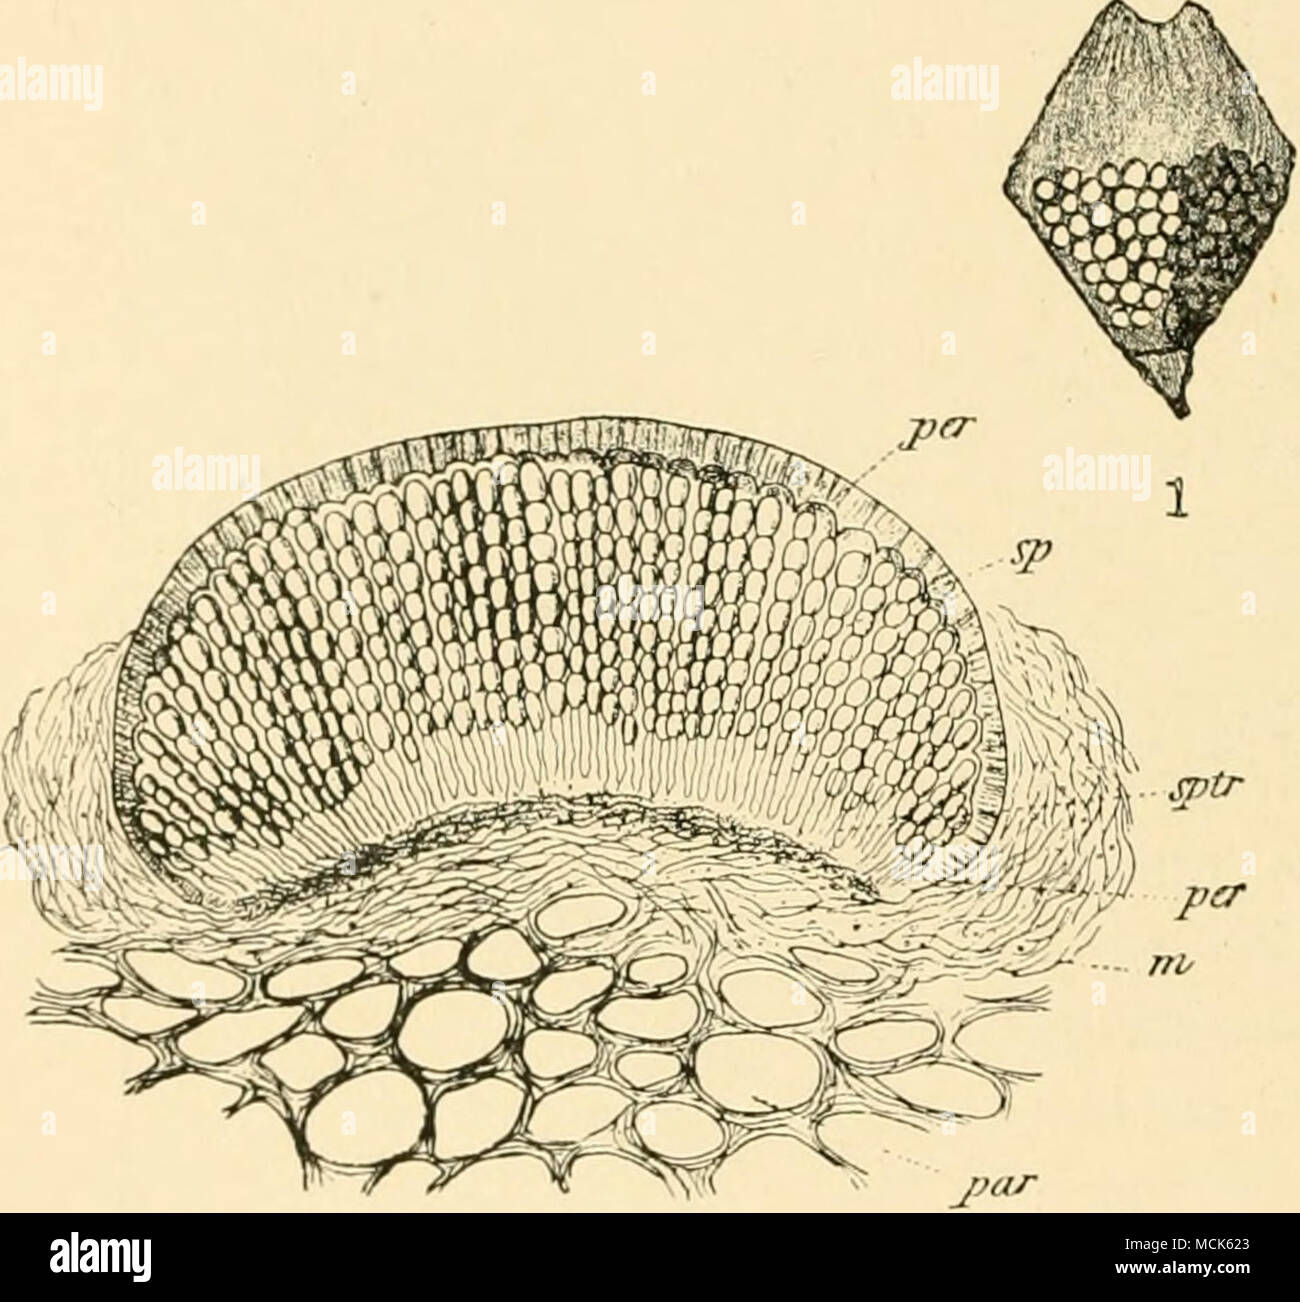 . -I 2 3 Fig. ^ii.—Aecidium HivhUinum. 1, Cone-scale of Spruce with aecidia, tliose to left dehiscing their yellow spores, those to right still closed, (v. Tubeuf del.) 2, Section through an immature aecidium. 3, Part of 2 enlarged—y)ir, peridium ; .«/), spores; zto, intermediate cells; sptr, sporophorcs ; m, mycelium; im,; the scale-parenchyma. (After Reess.)  The aecidia break out on the inner (rarely the outer) side of the bases of the cone-scales; each is enclosed in a firm brown lignified peridium, which ruptures by a cross-fissure and becomes an open disc. The young spores are joined by Stock Photo